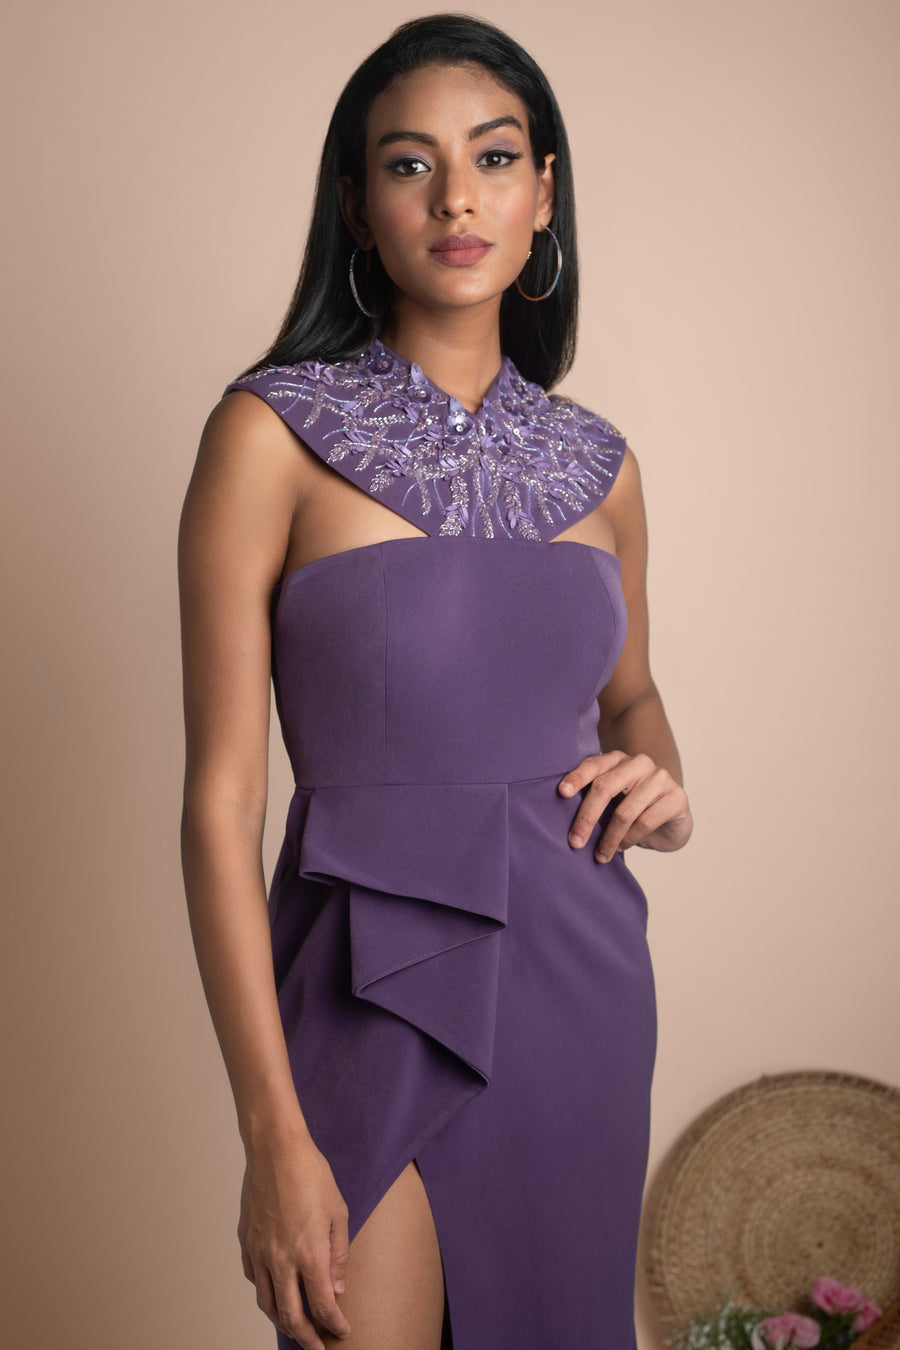 Draped Gown | Stylish formal and party wear.